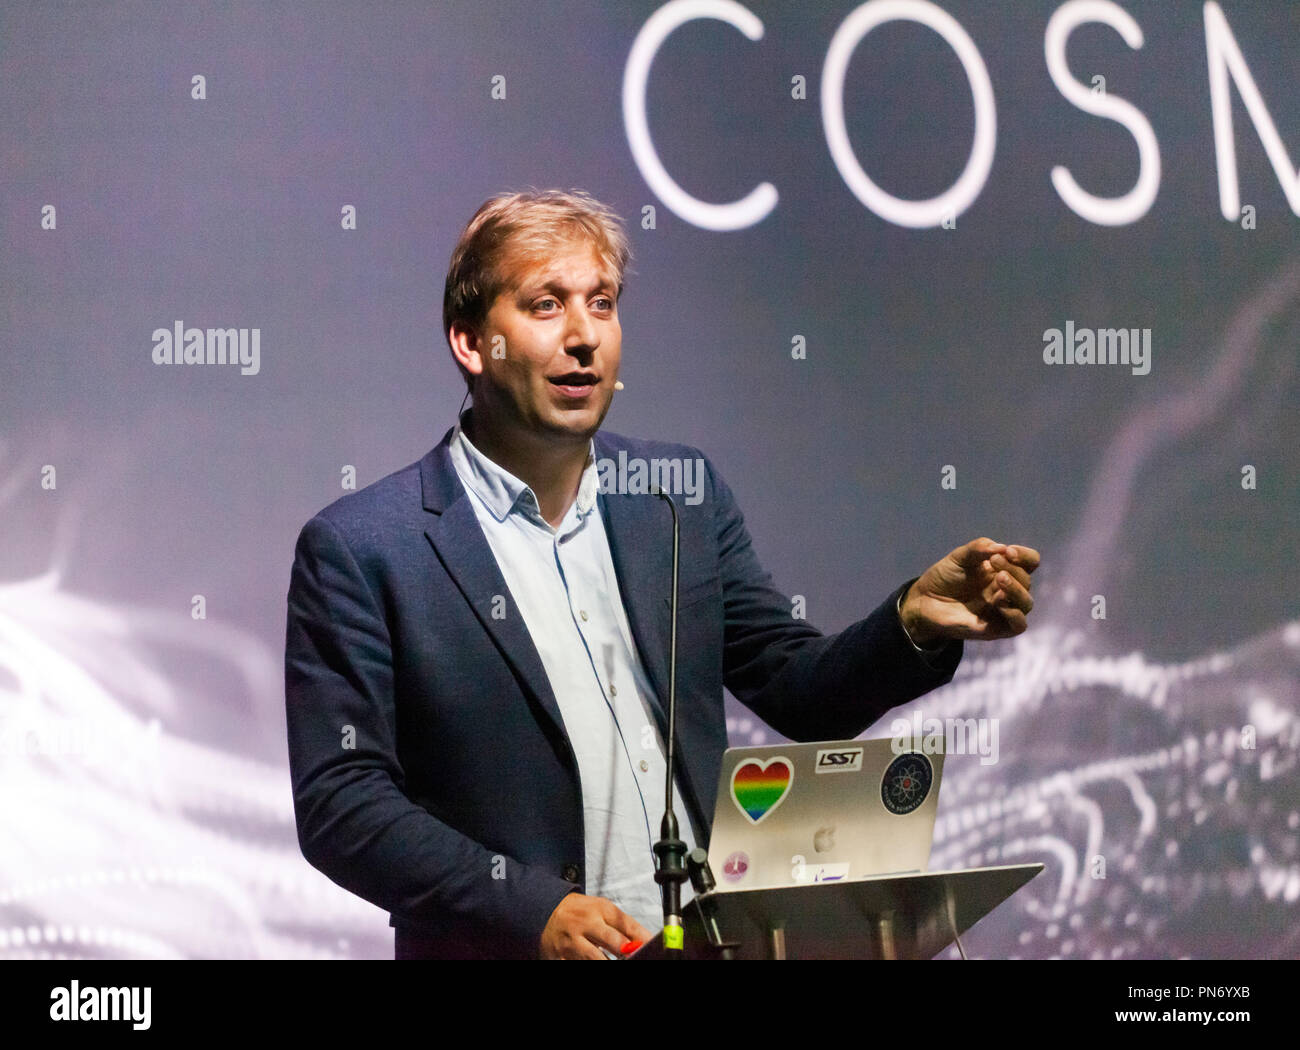 Astronomer Chris Linott  talking about the prospects of meeting life from another world, on the Cosmos Stage, at New Scientist Live Stock Photo